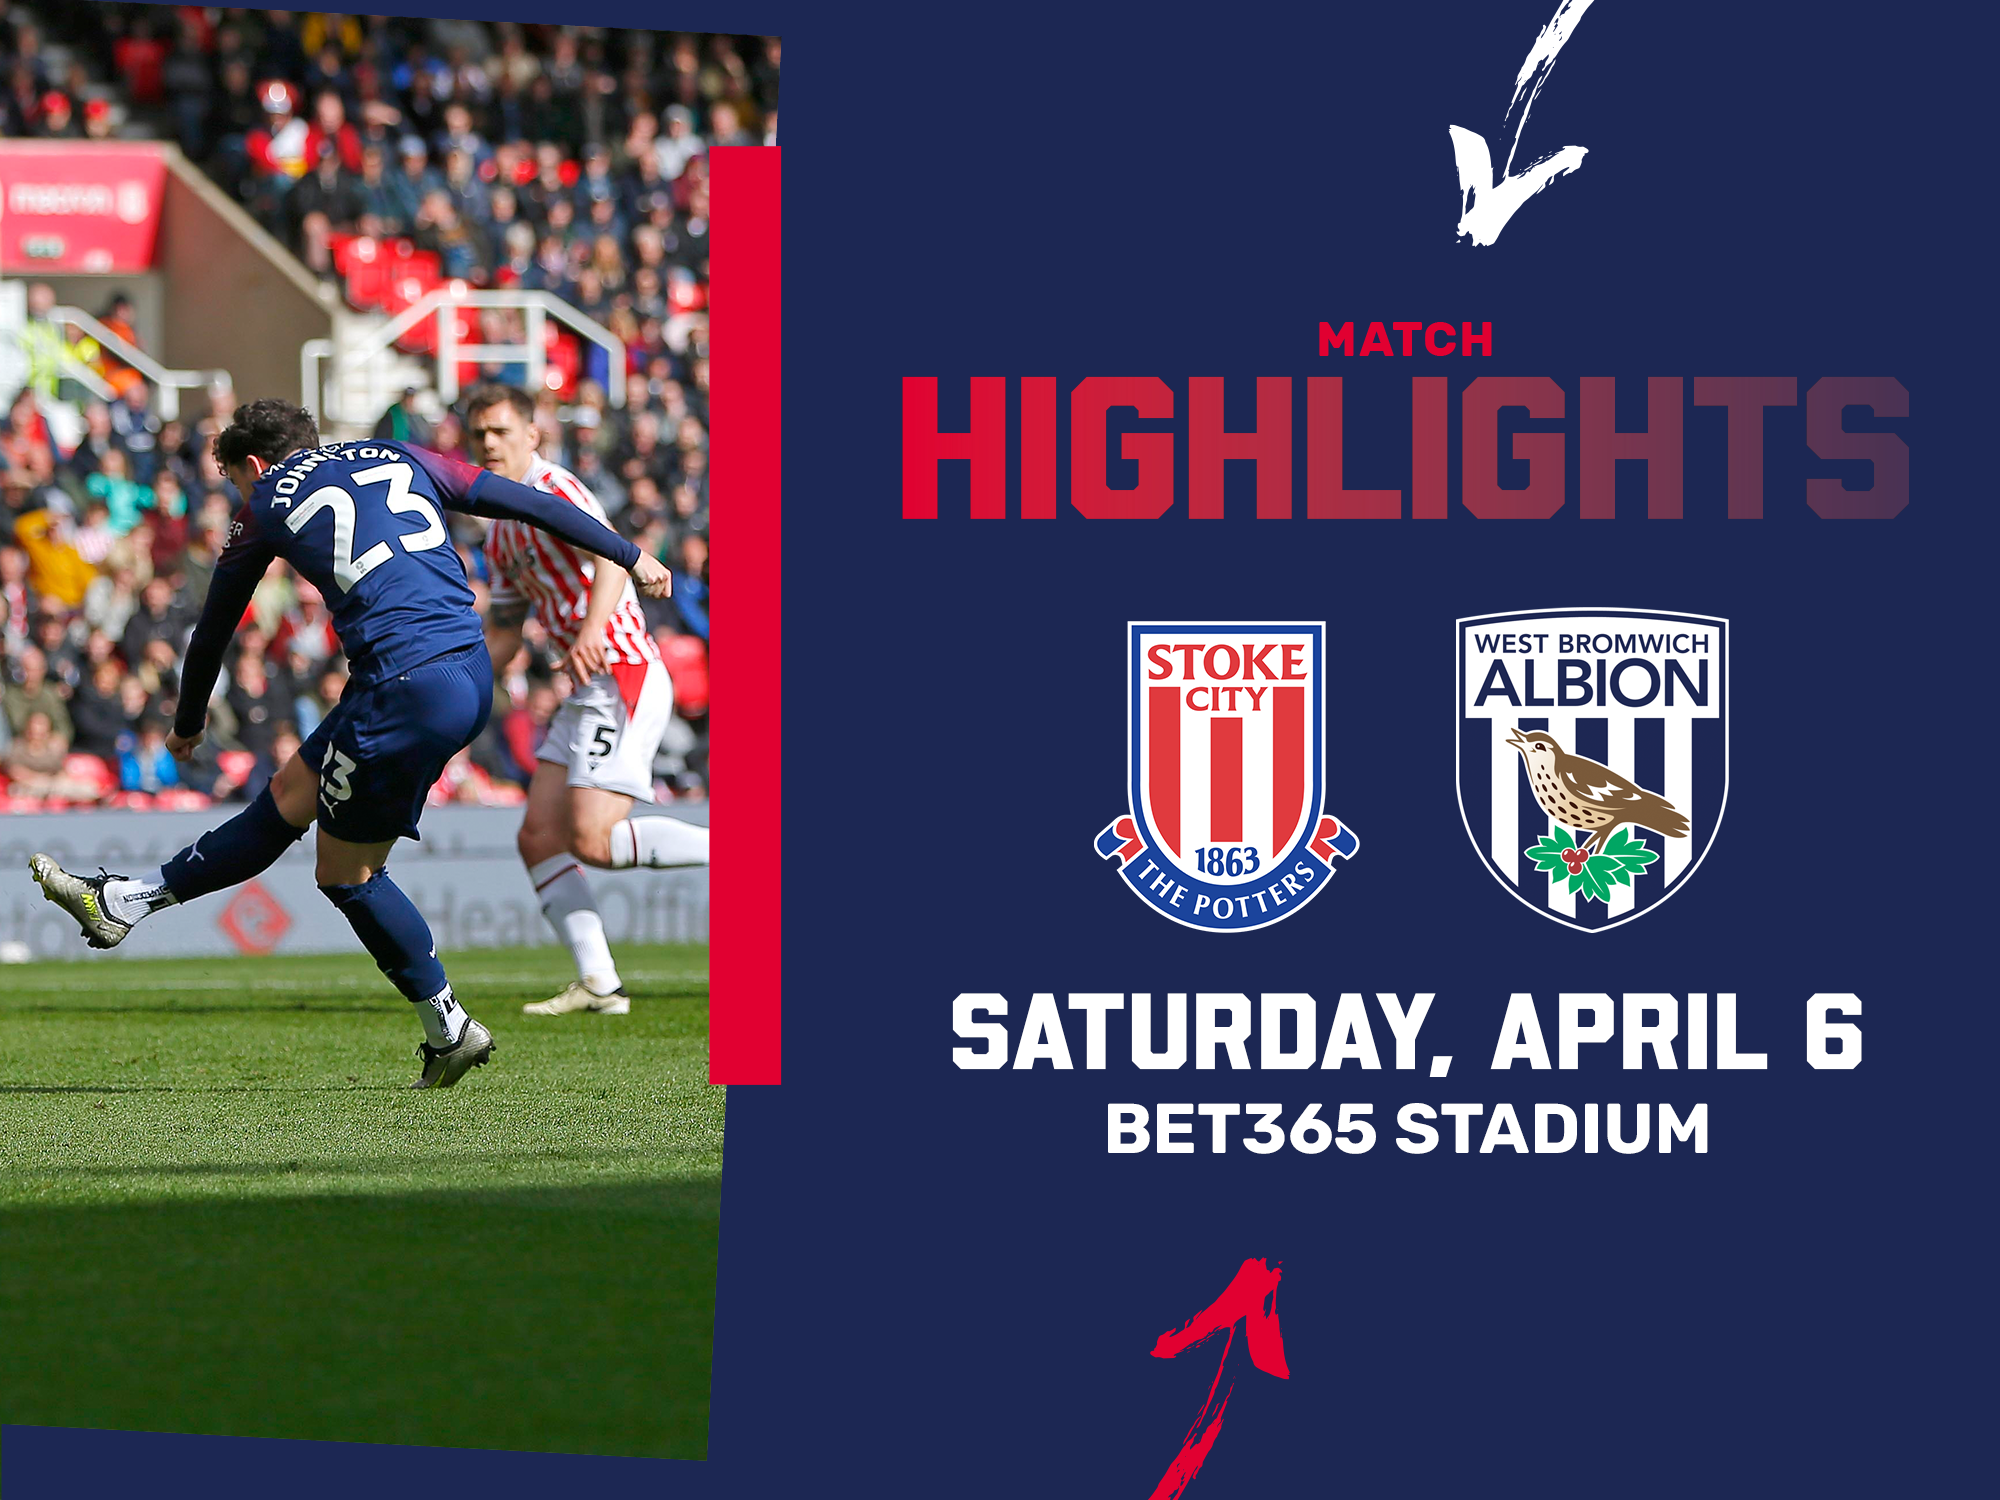 A match highlights photo graphic, in the 2023/24 away colours, and the club crests of Albion and Stoke City, showing an image of Mikey Johnston shooting at goal at the bet365 stadium